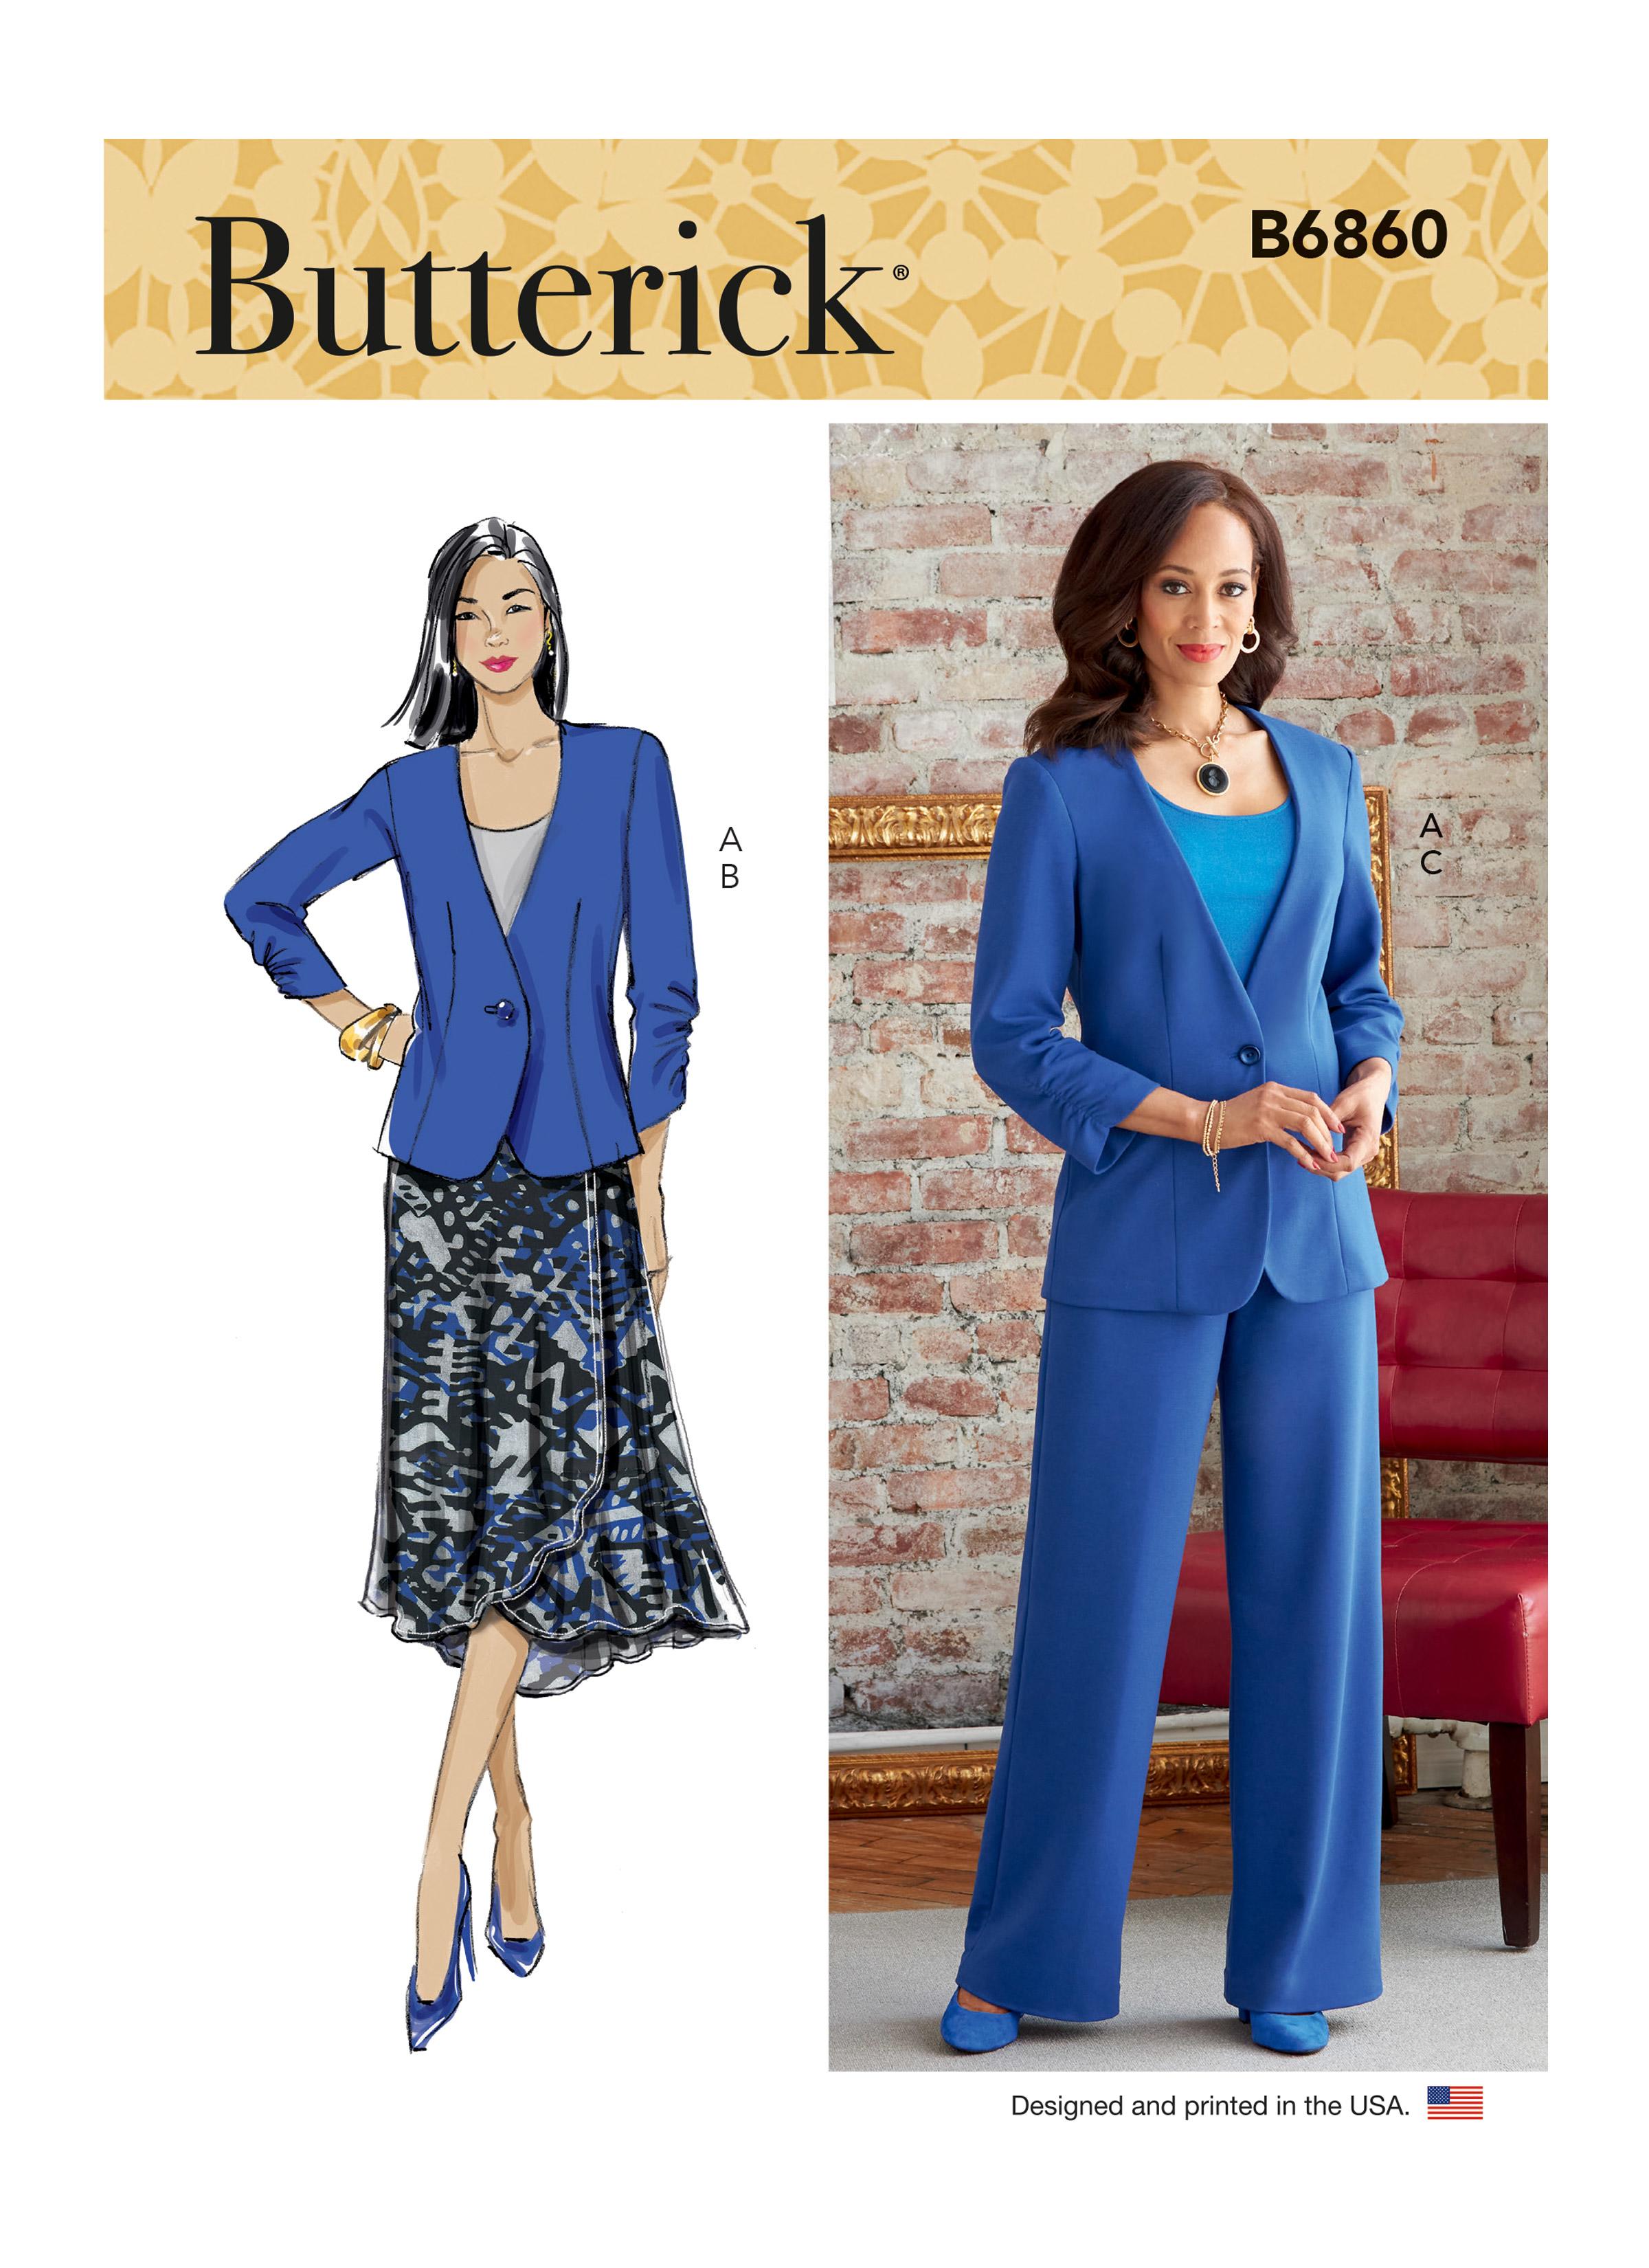 Butterick B6860 Misses' and Women's Jacket, Skirt and Pants